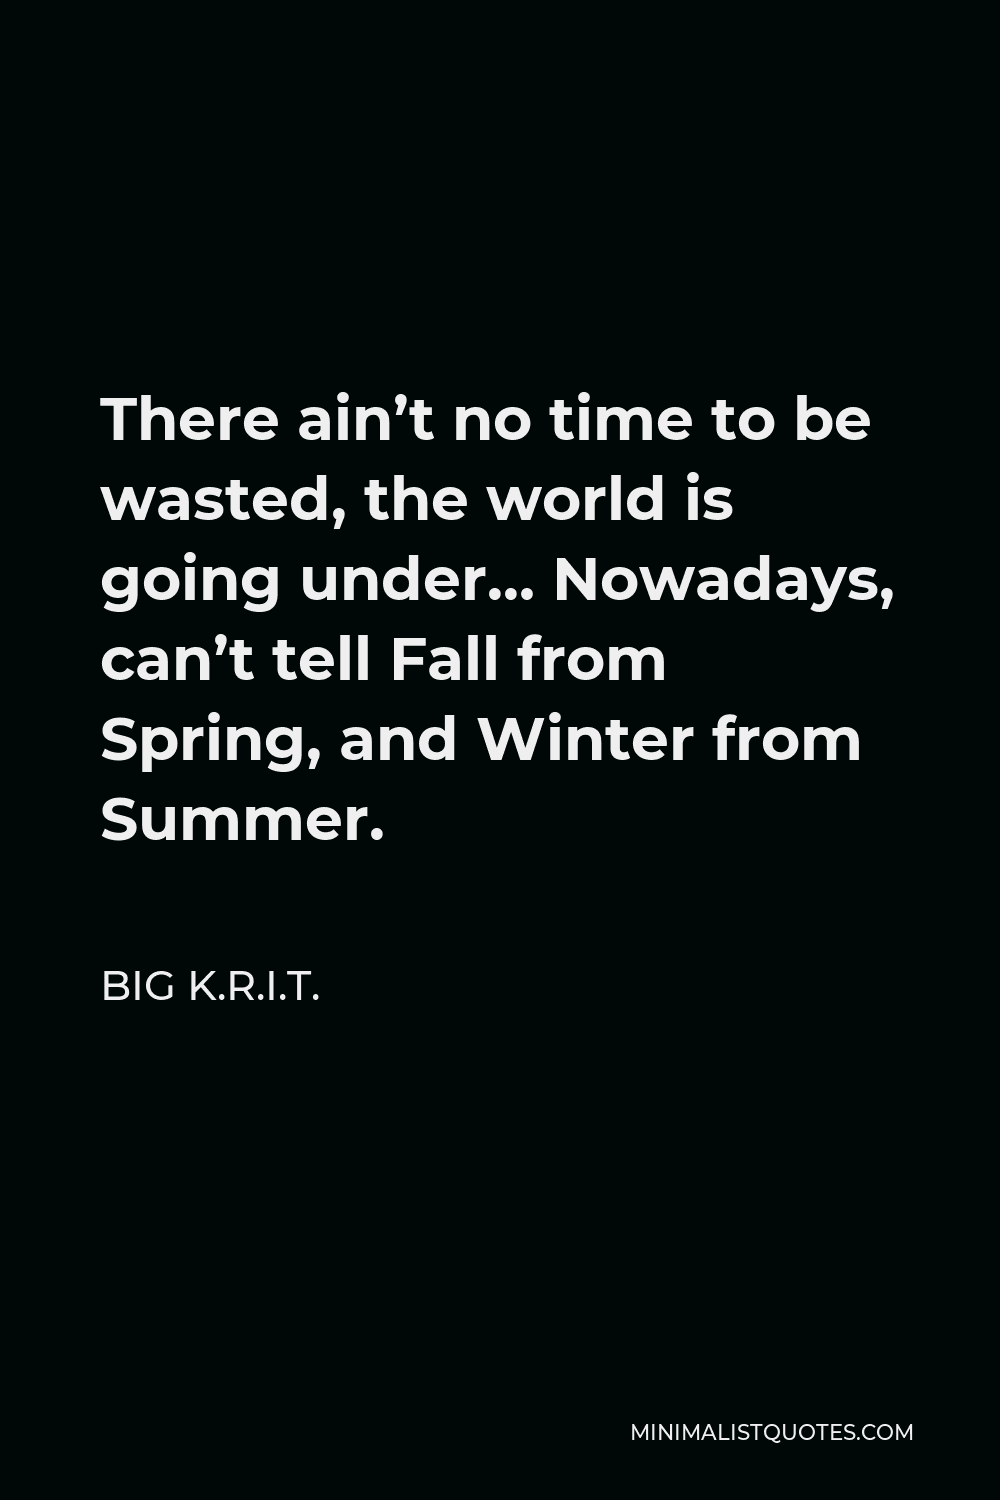 Big K.R.I.T. Quote - There ain’t no time to be wasted, the world is going under… Nowadays, can’t tell Fall from Spring, and Winter from Summer.